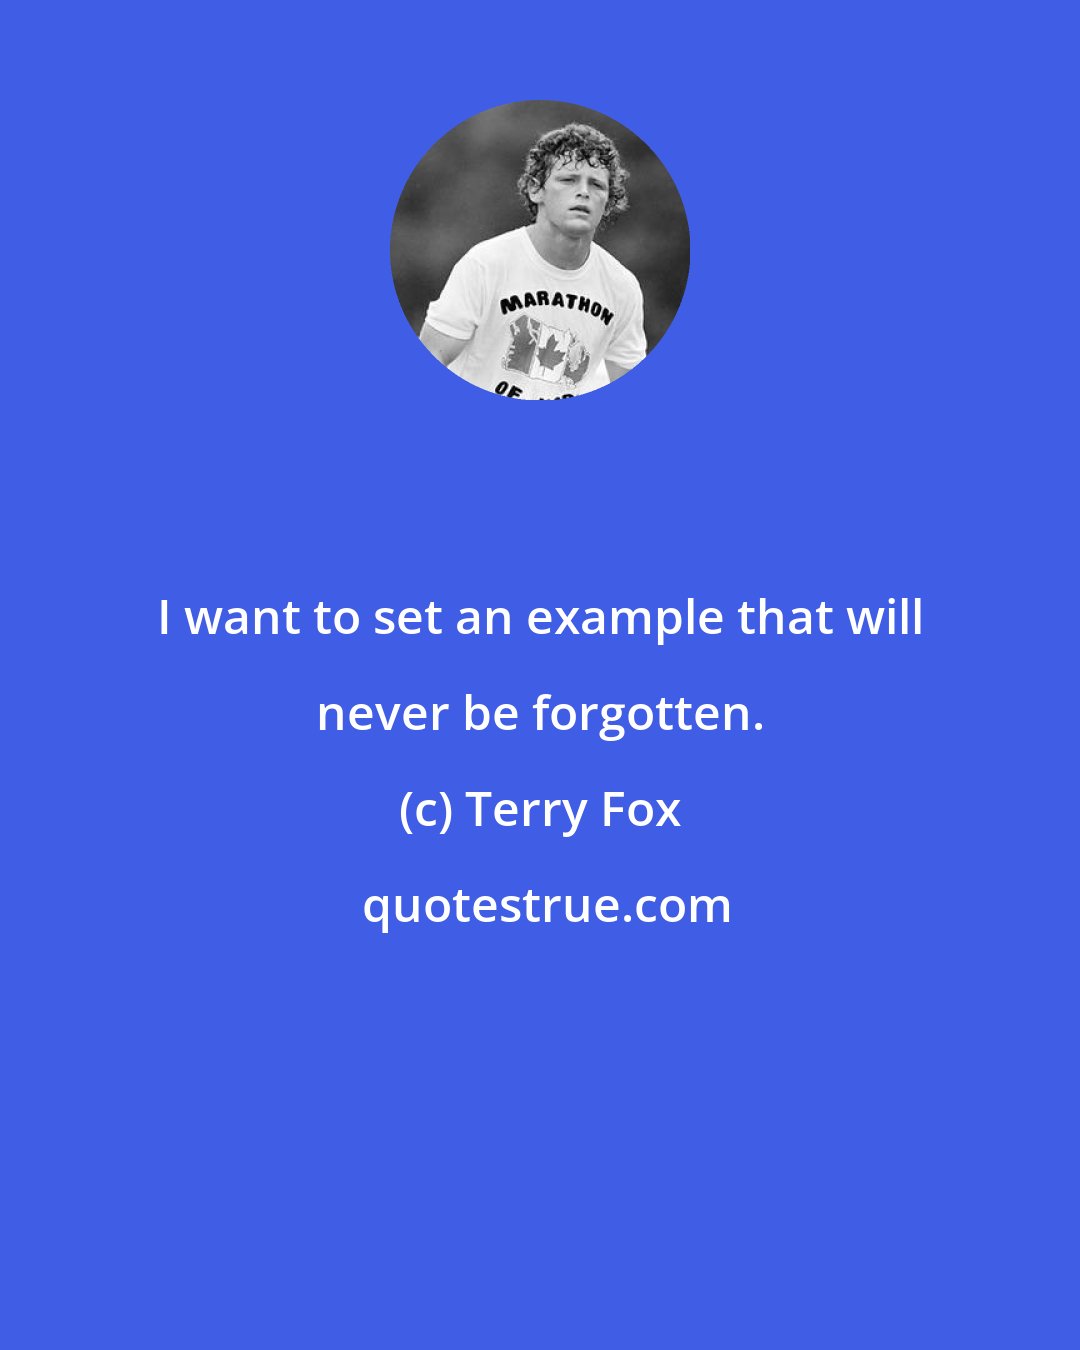 Terry Fox: I want to set an example that will never be forgotten.